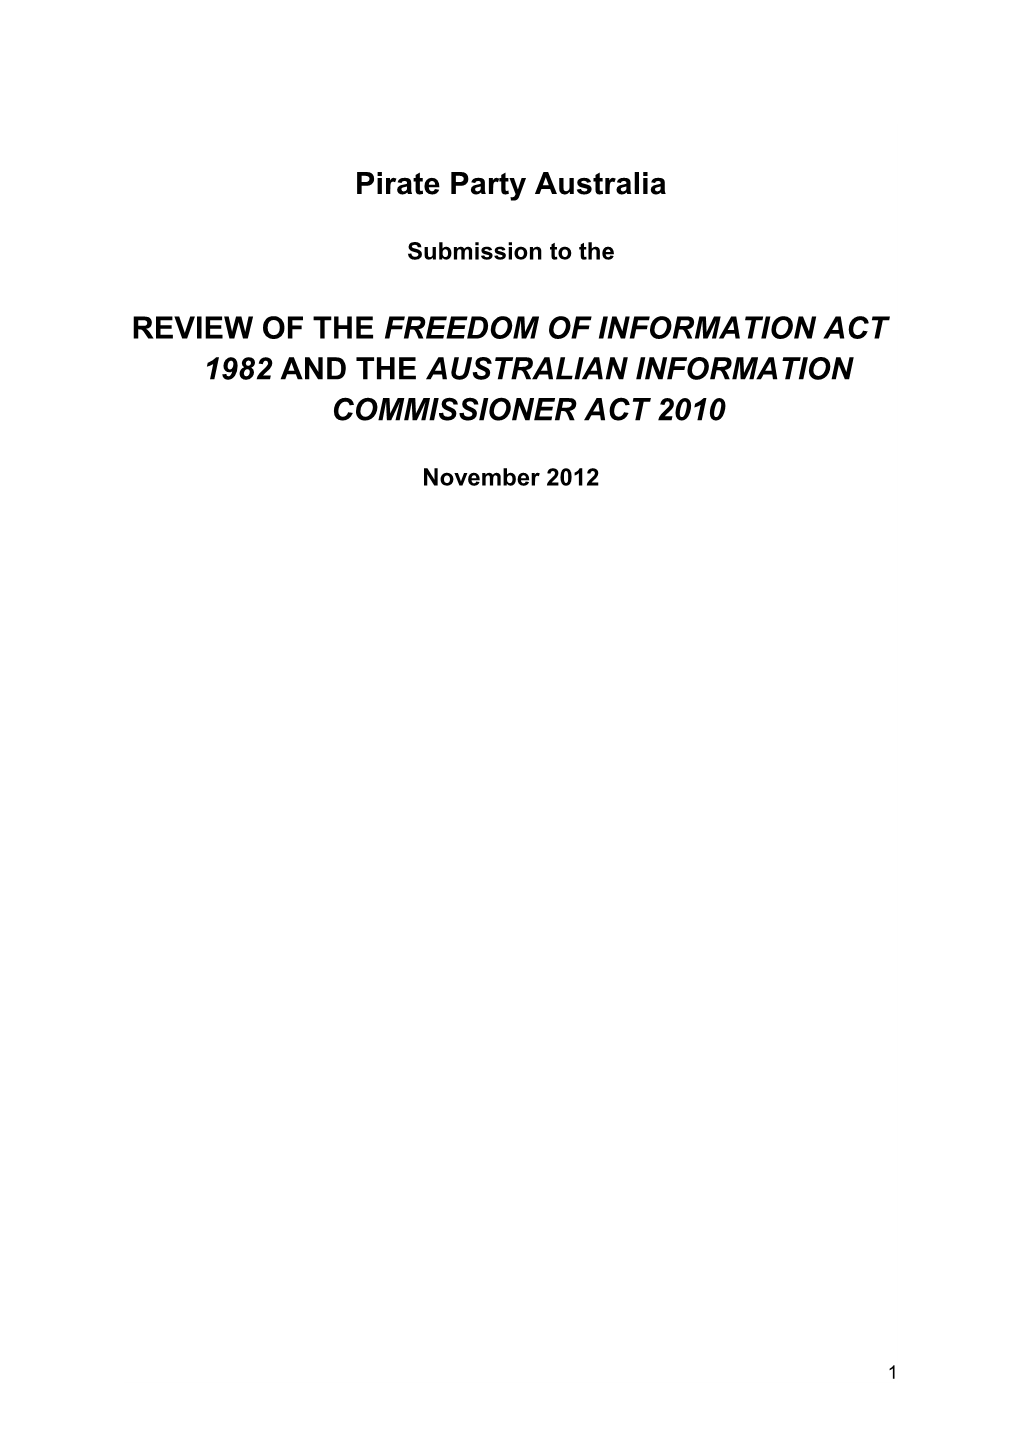 Freedom of Information Review Submission